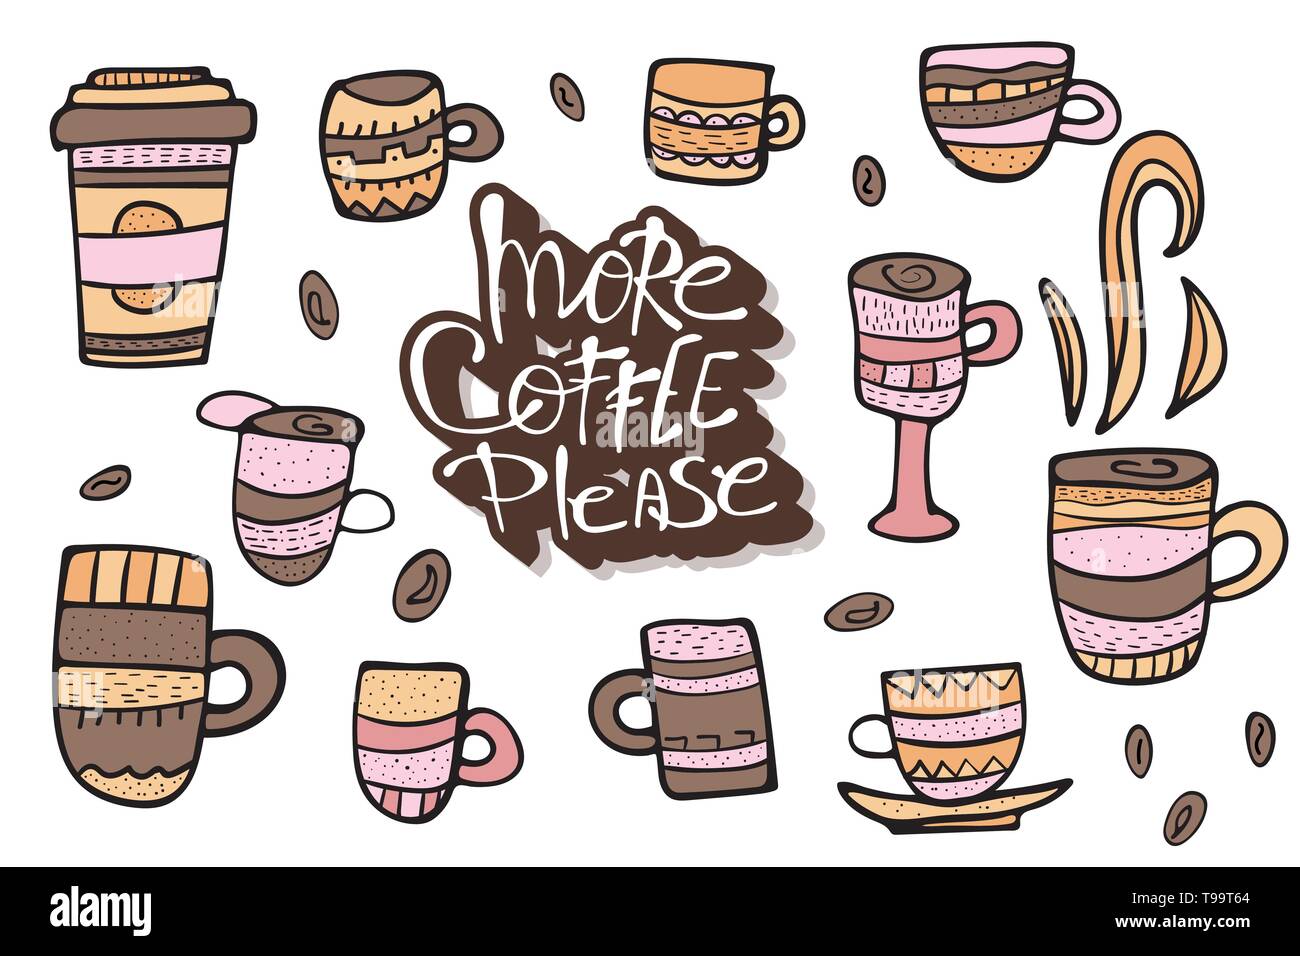 More coffe please lettering with mugs. Set of cups with hot beverage in doodle style. Elements for menu decoration. Vector illustration. Stock Vector